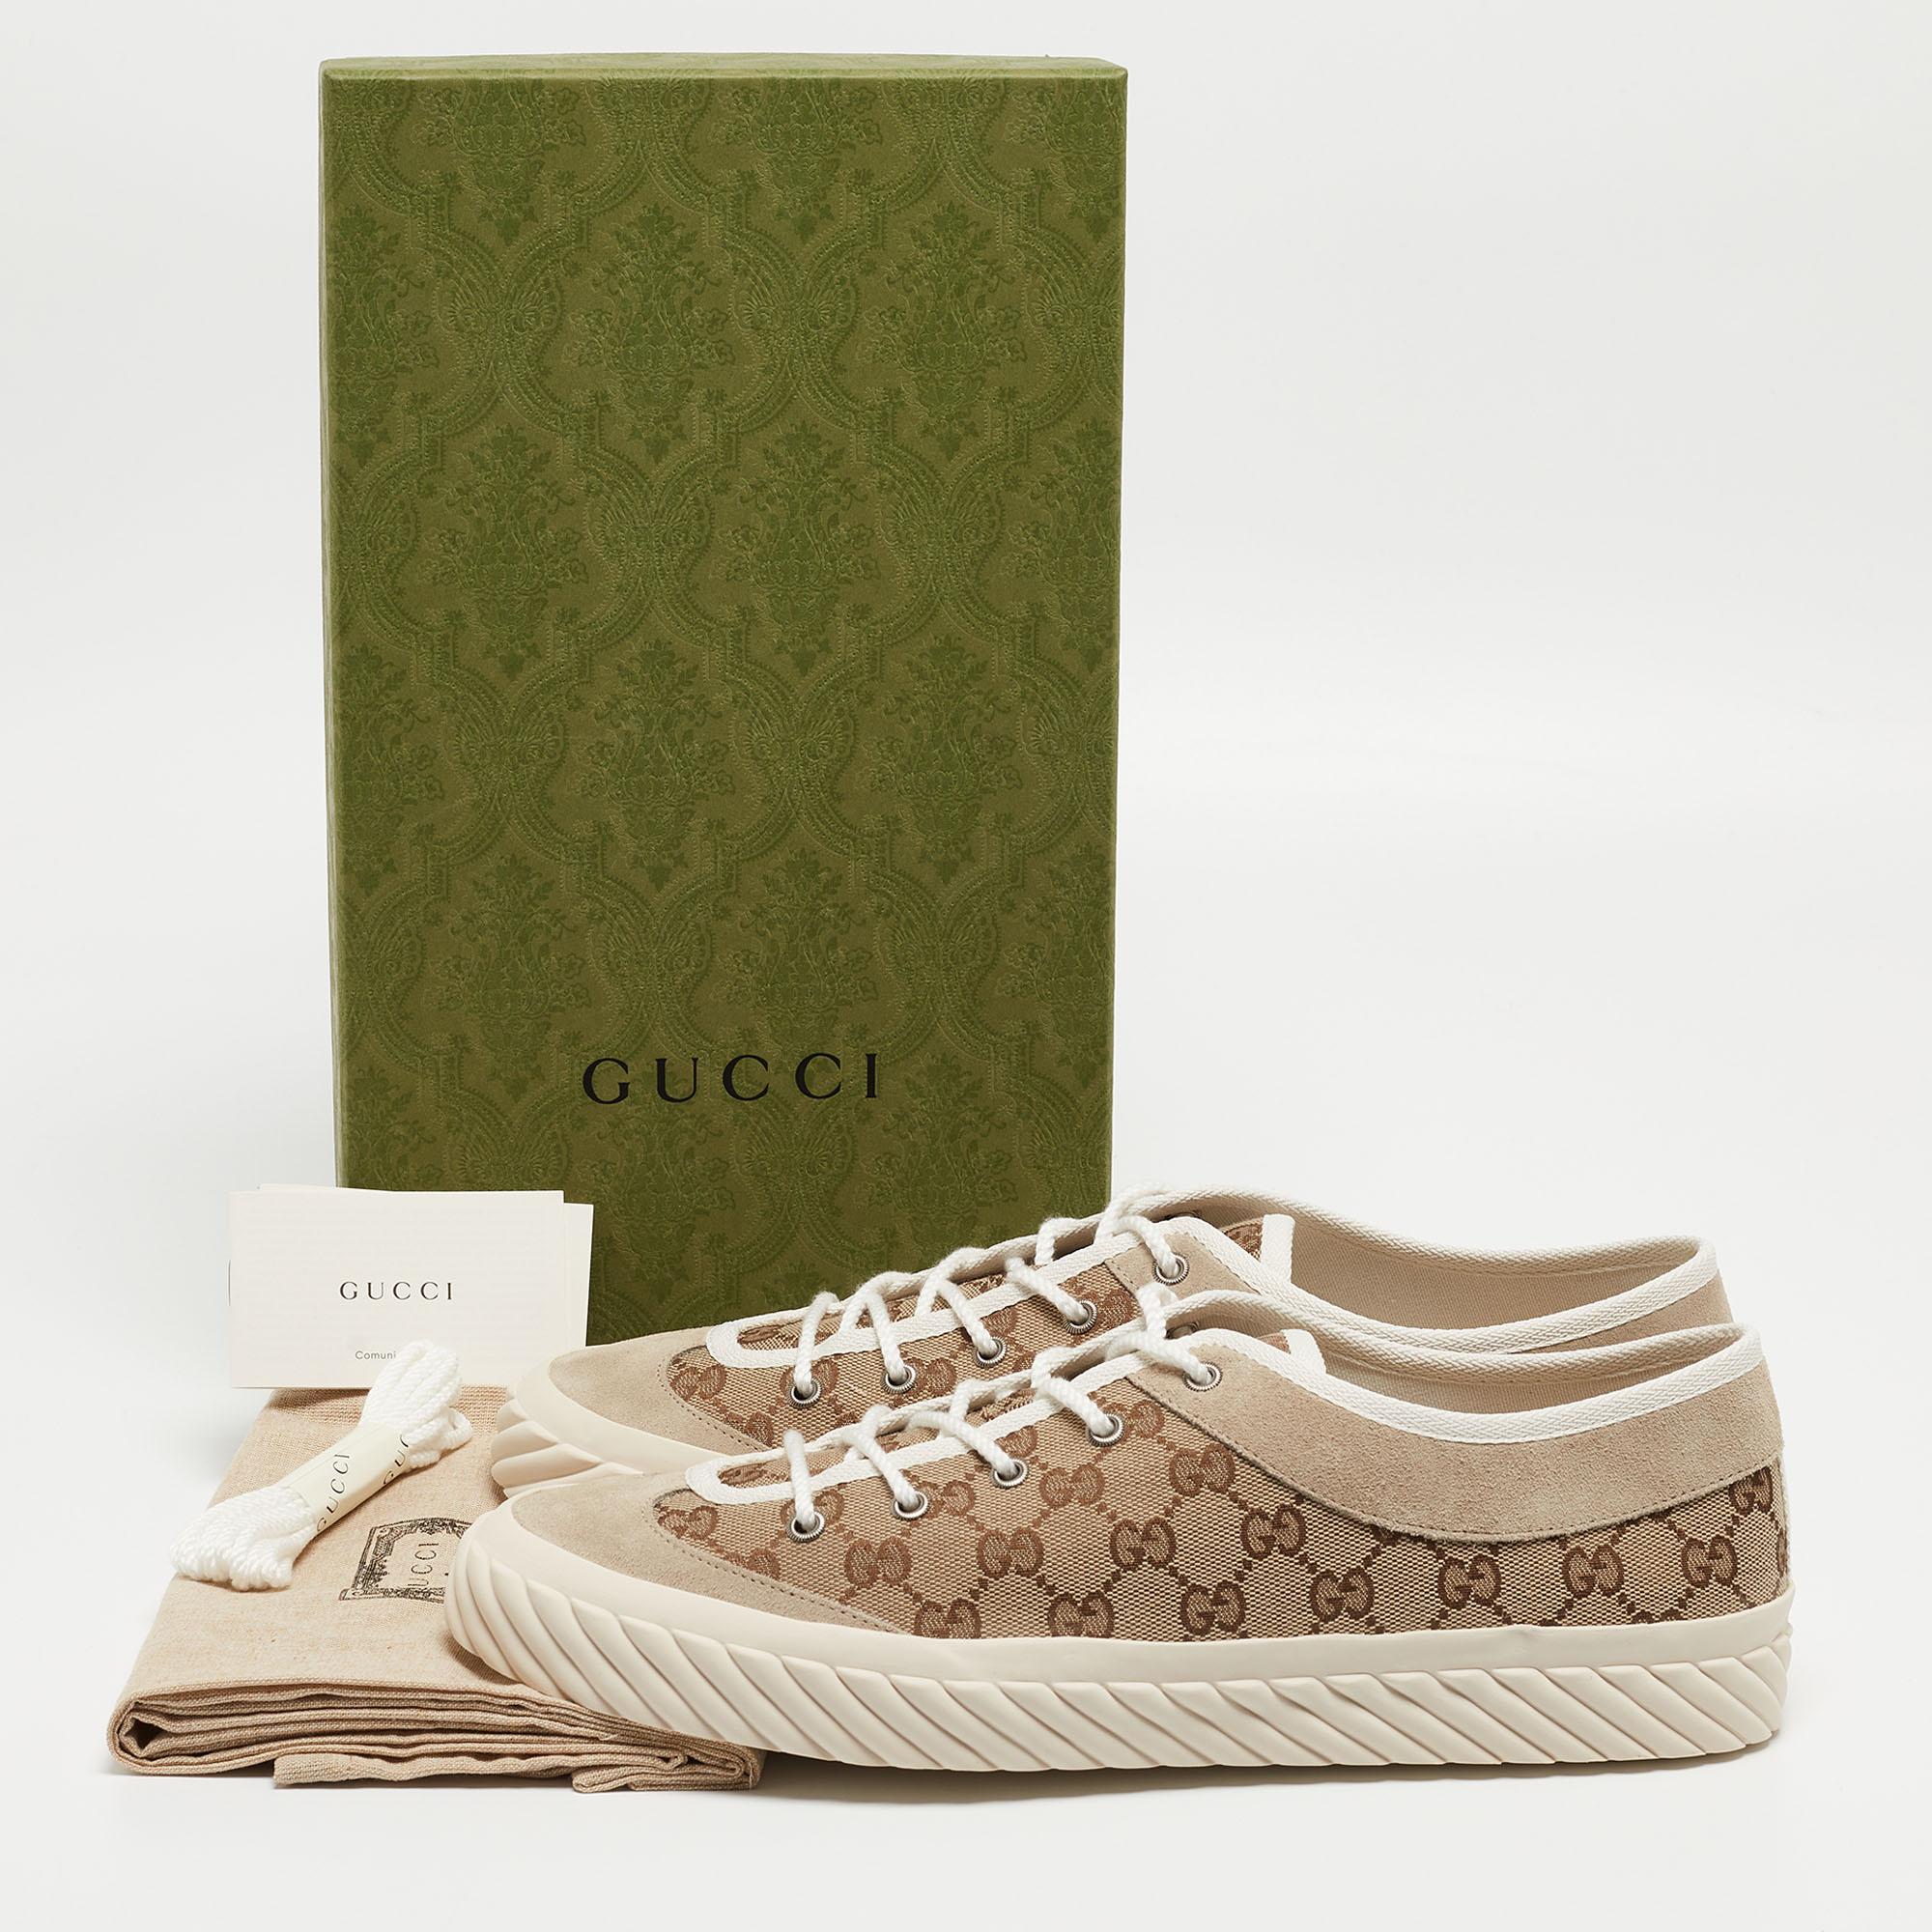 Gucci Beige Canvas and Suede Low Top Sneakers Size 46 For Sale 3